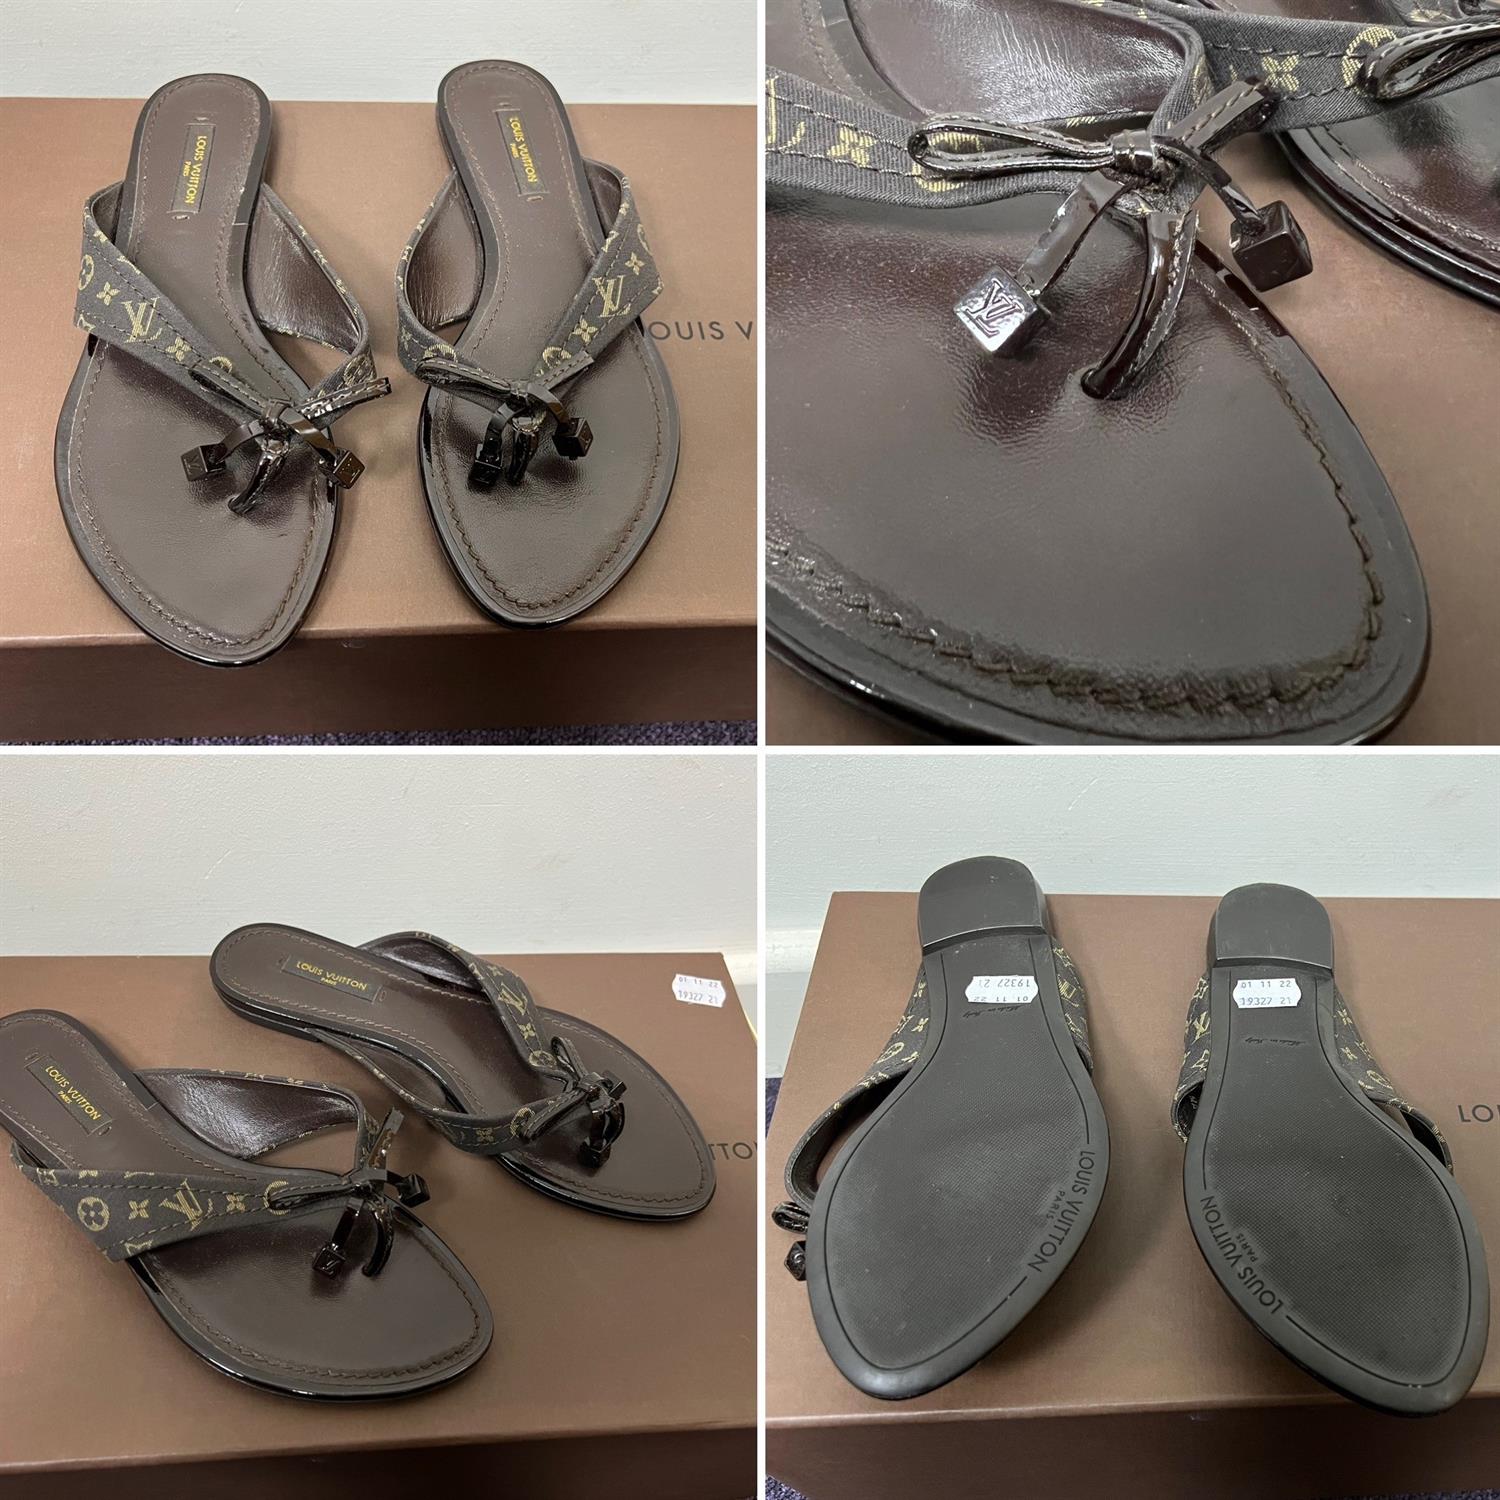 One pair LOUIS VUITTON boxed brown leather and canvas flip flops/ ladies slider shoes.